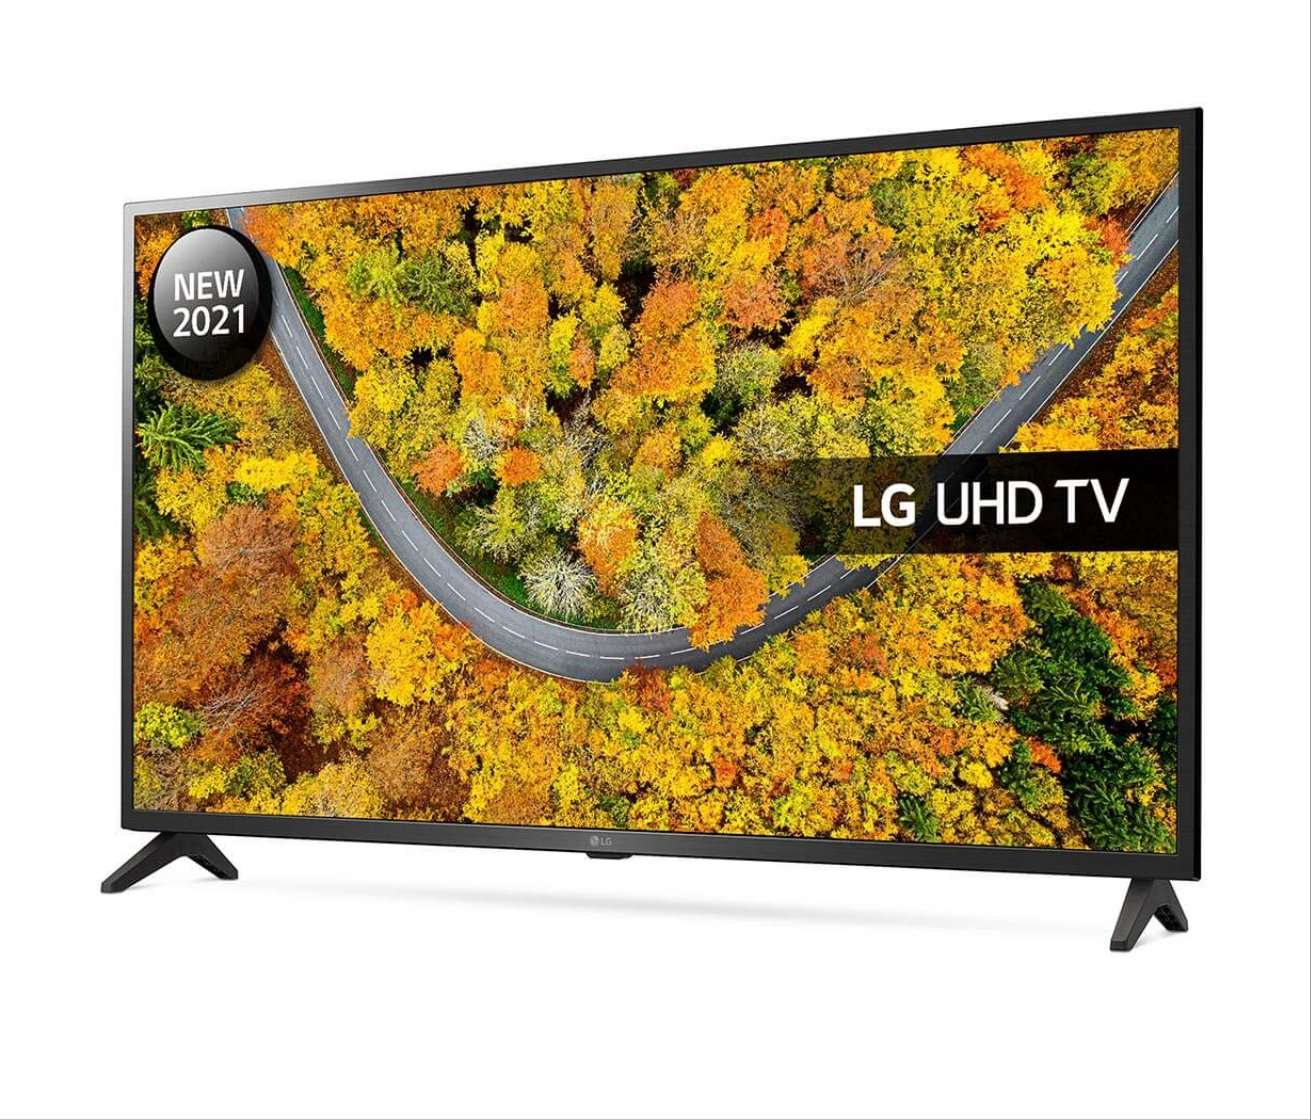 LG 43UP75006LF 43 inch 4K UHD HDR Smart LED TV (2021 Model) with Freeview Play, Prime Video, Netflix, Disney+